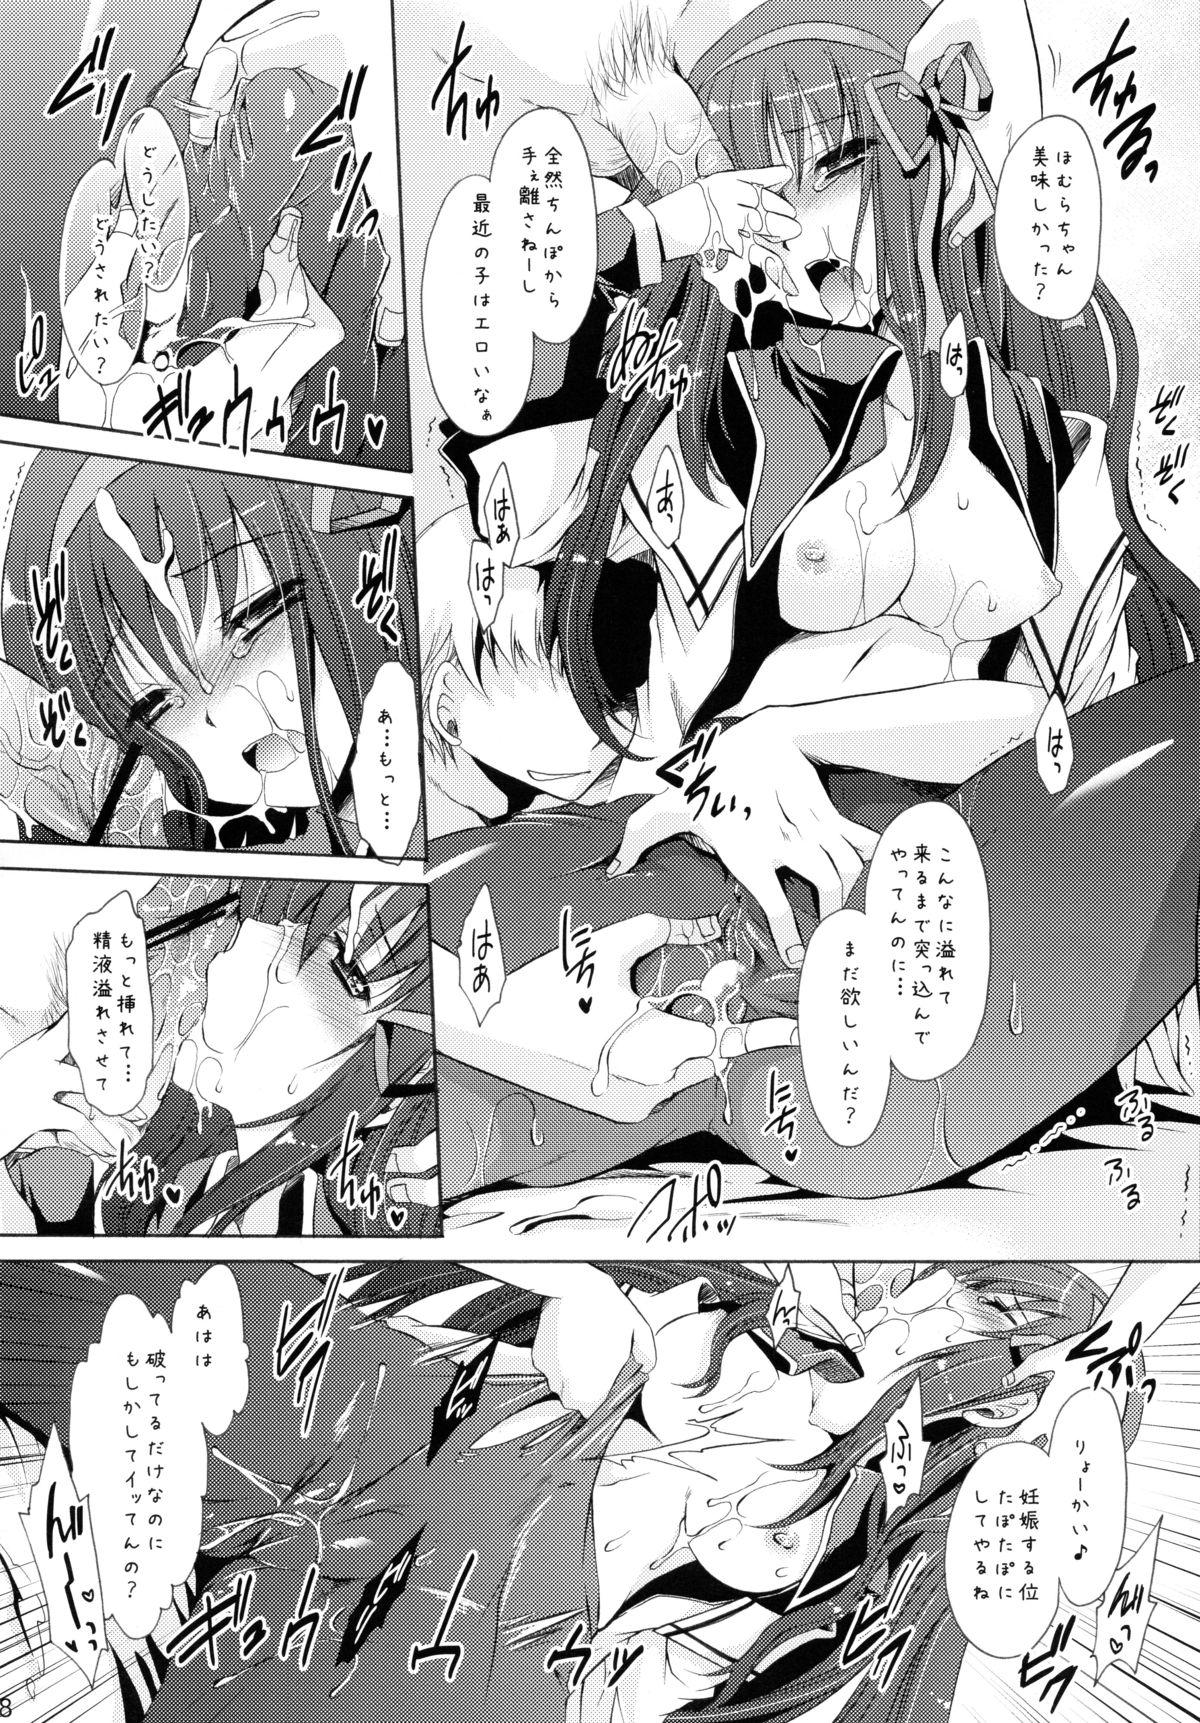 Belly Tear butterfly - Puella magi madoka magica Gostosas - Page 7